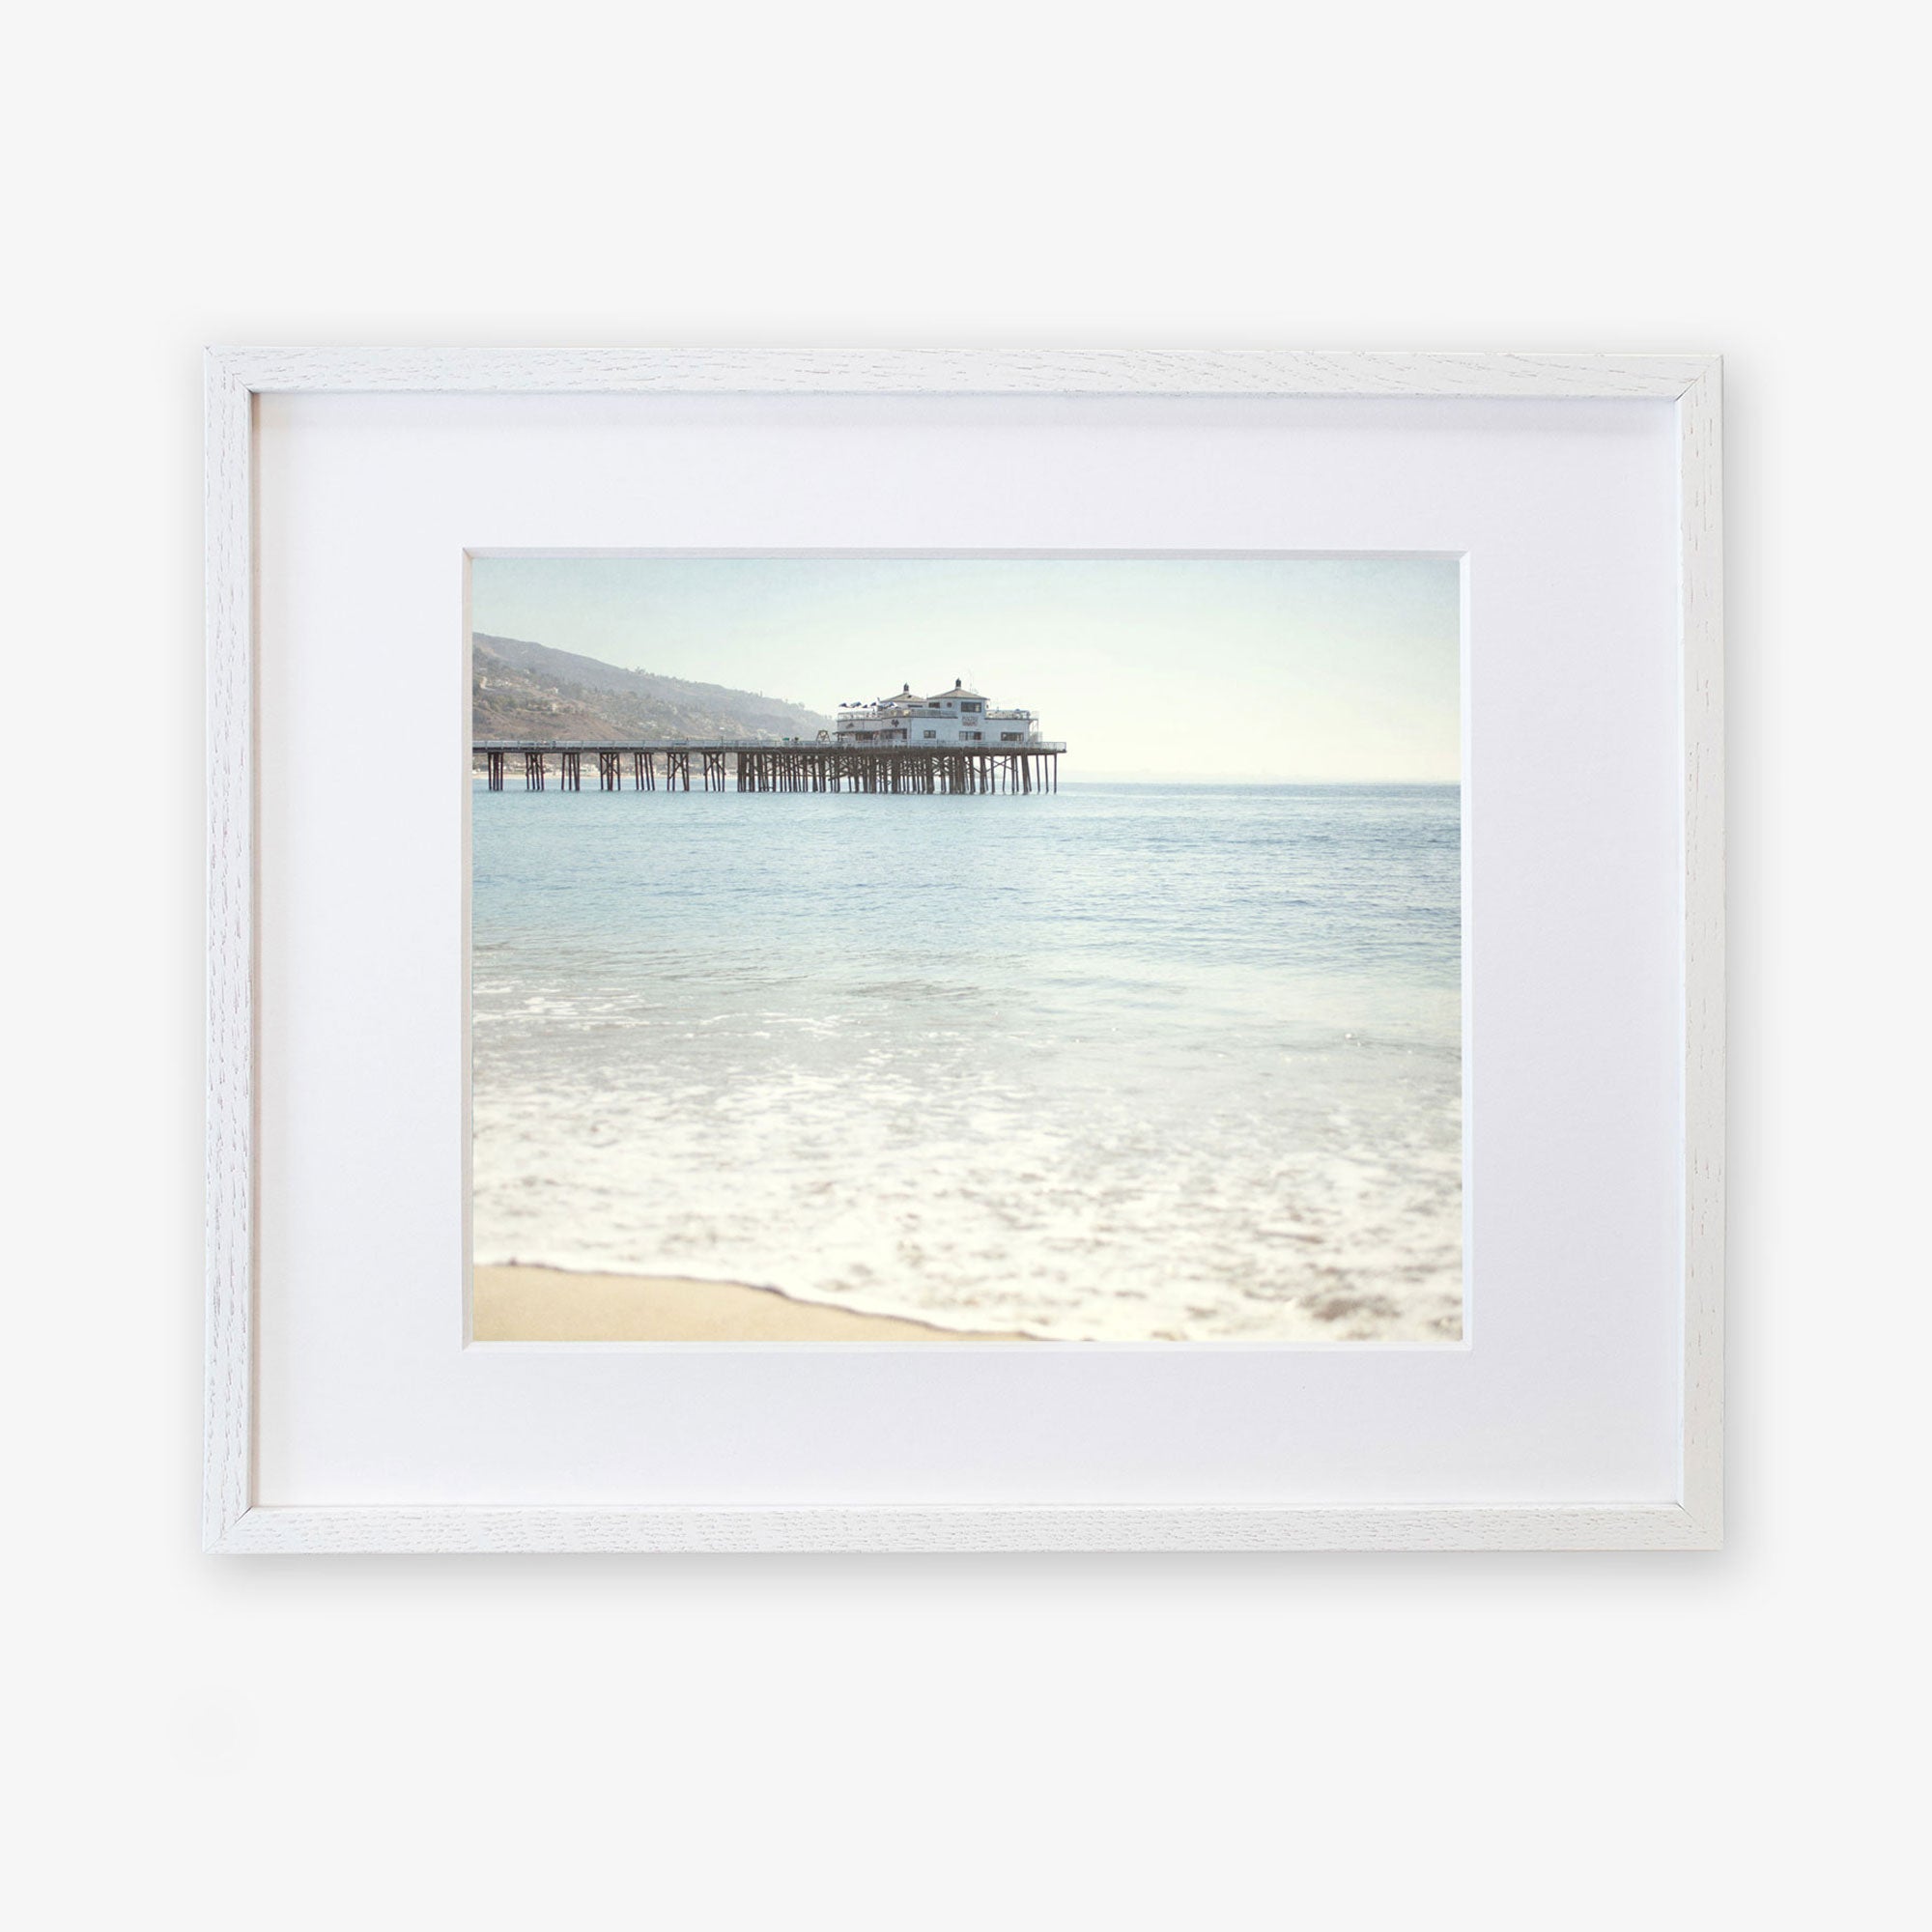 Framed photograph of a peaceful beach with gentle waves lapping at the shore, showcasing &#39;Malibu Pier&#39; extending into the calm blue ocean under a clear sky - Offley Green&#39;s California Beach Print.